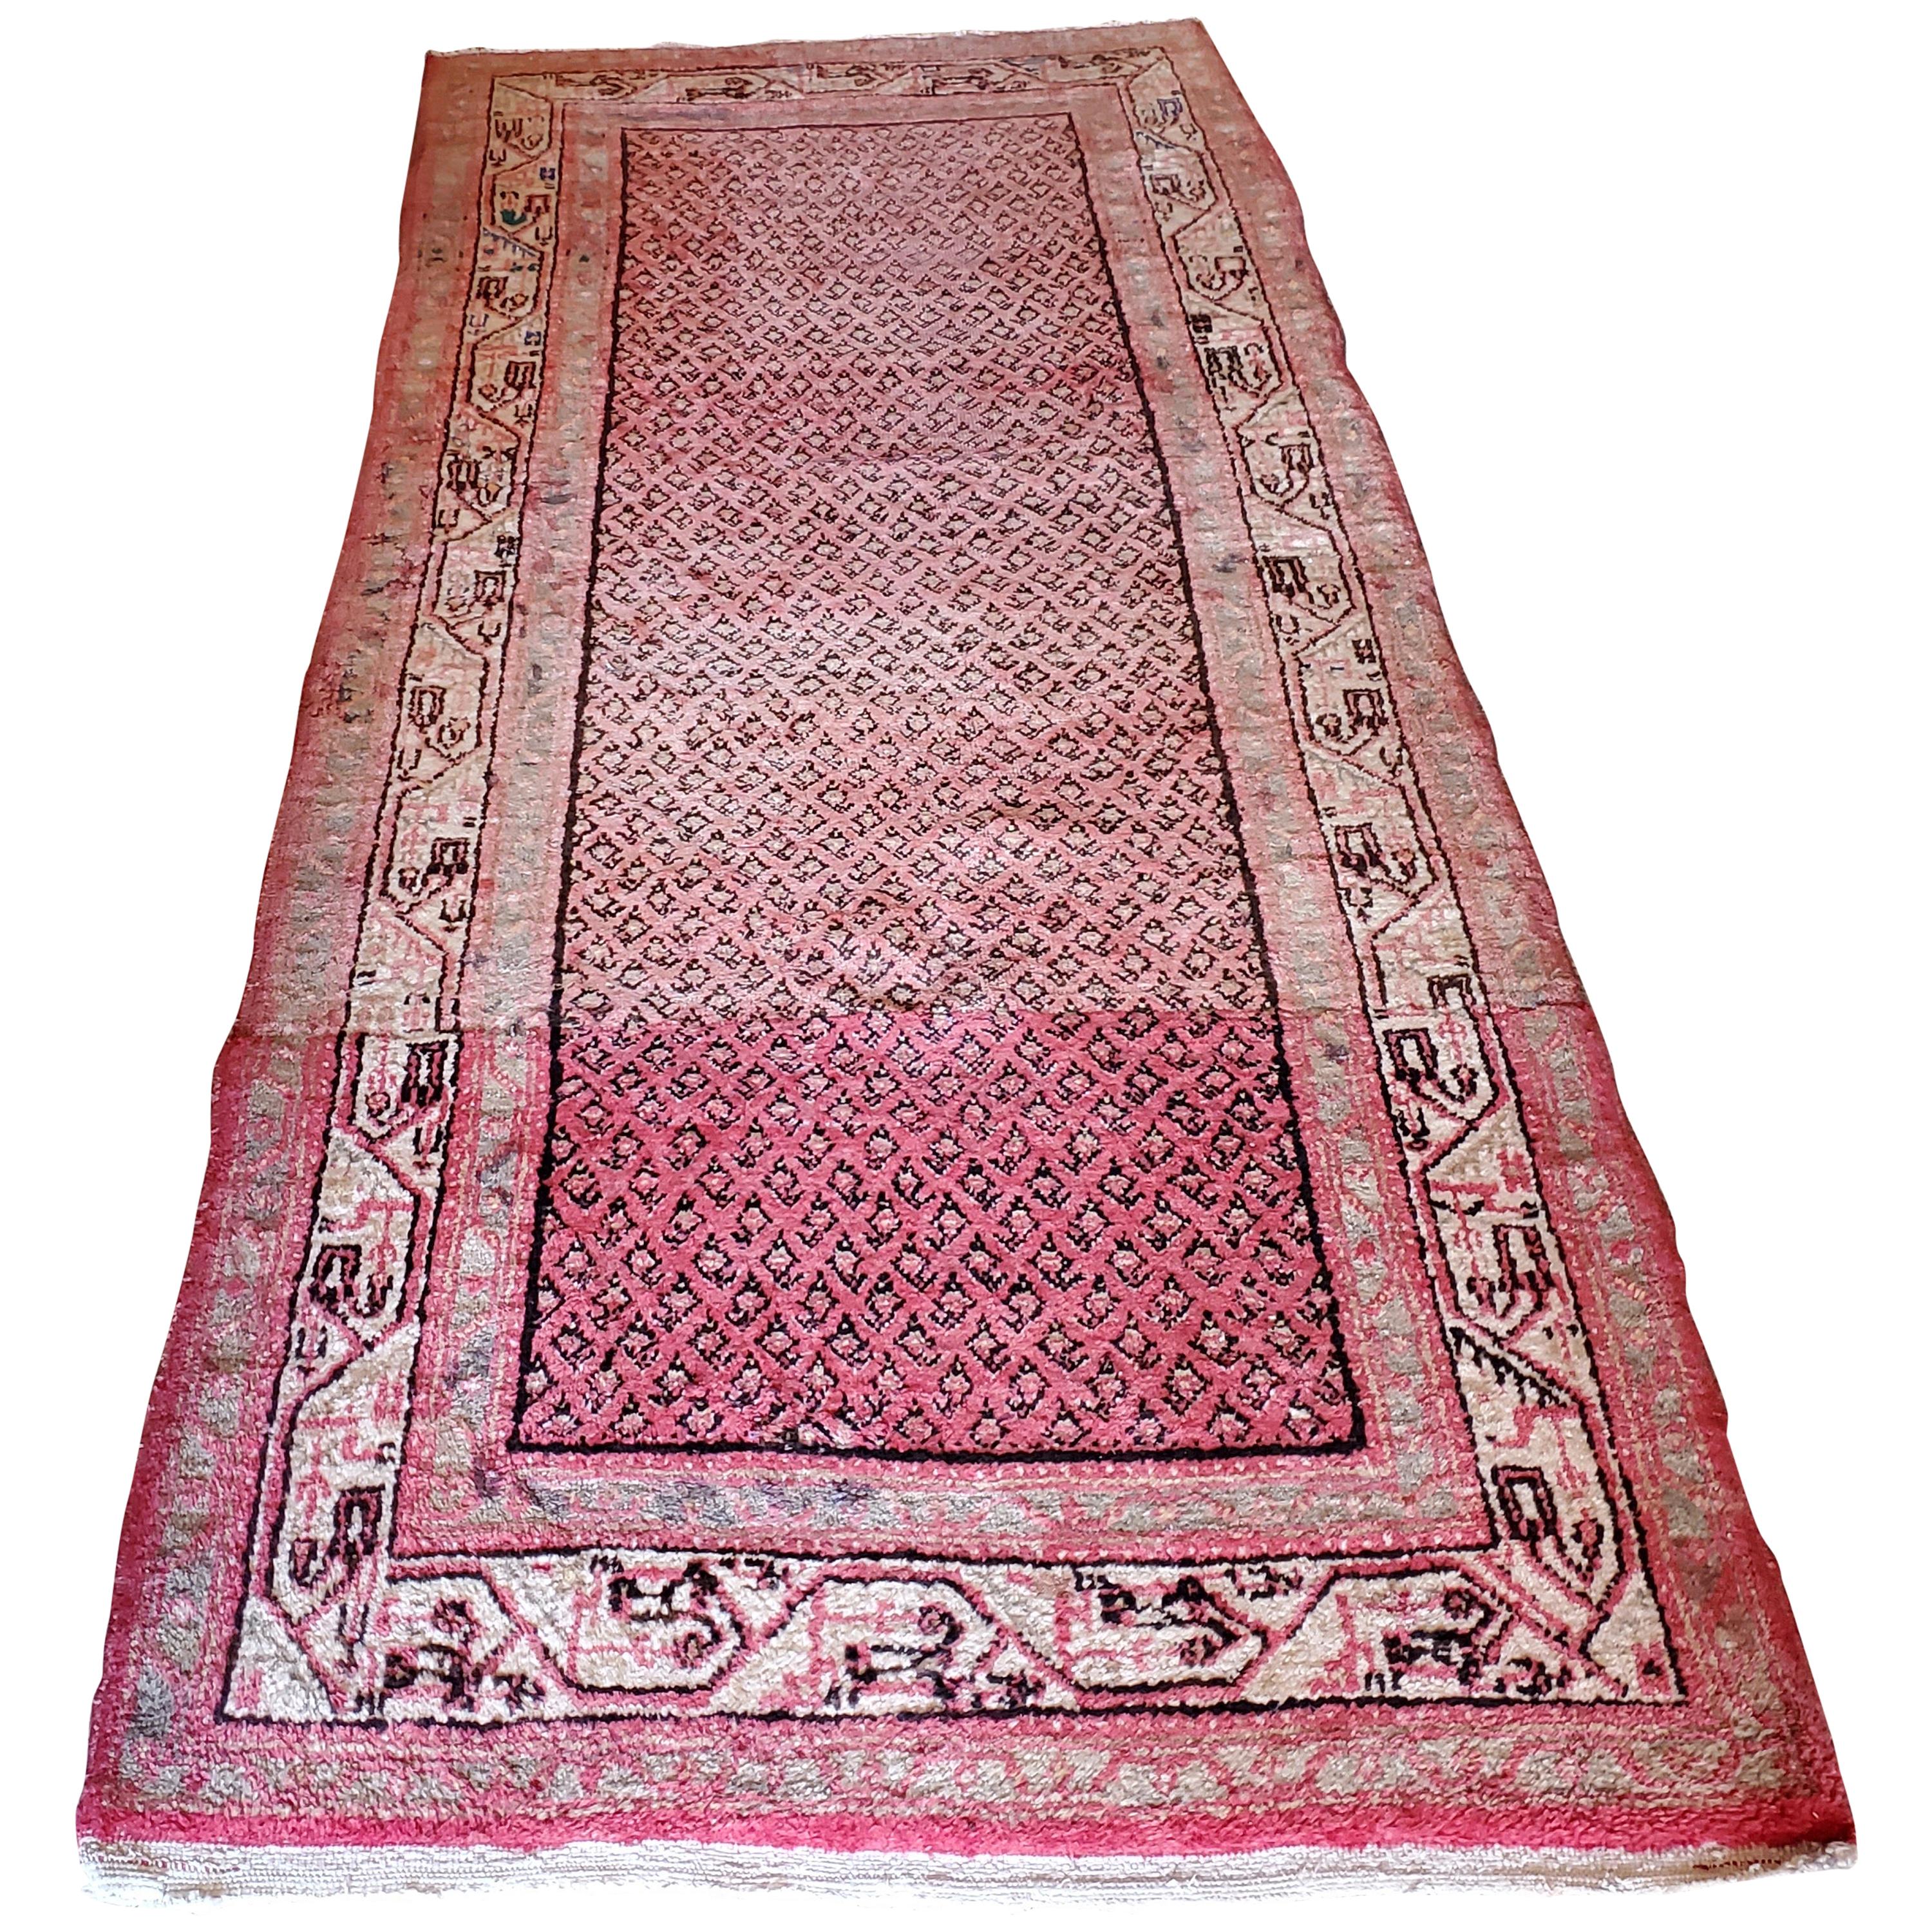 Large Size Asian Persian Rug, Soft and Colorful For Sale